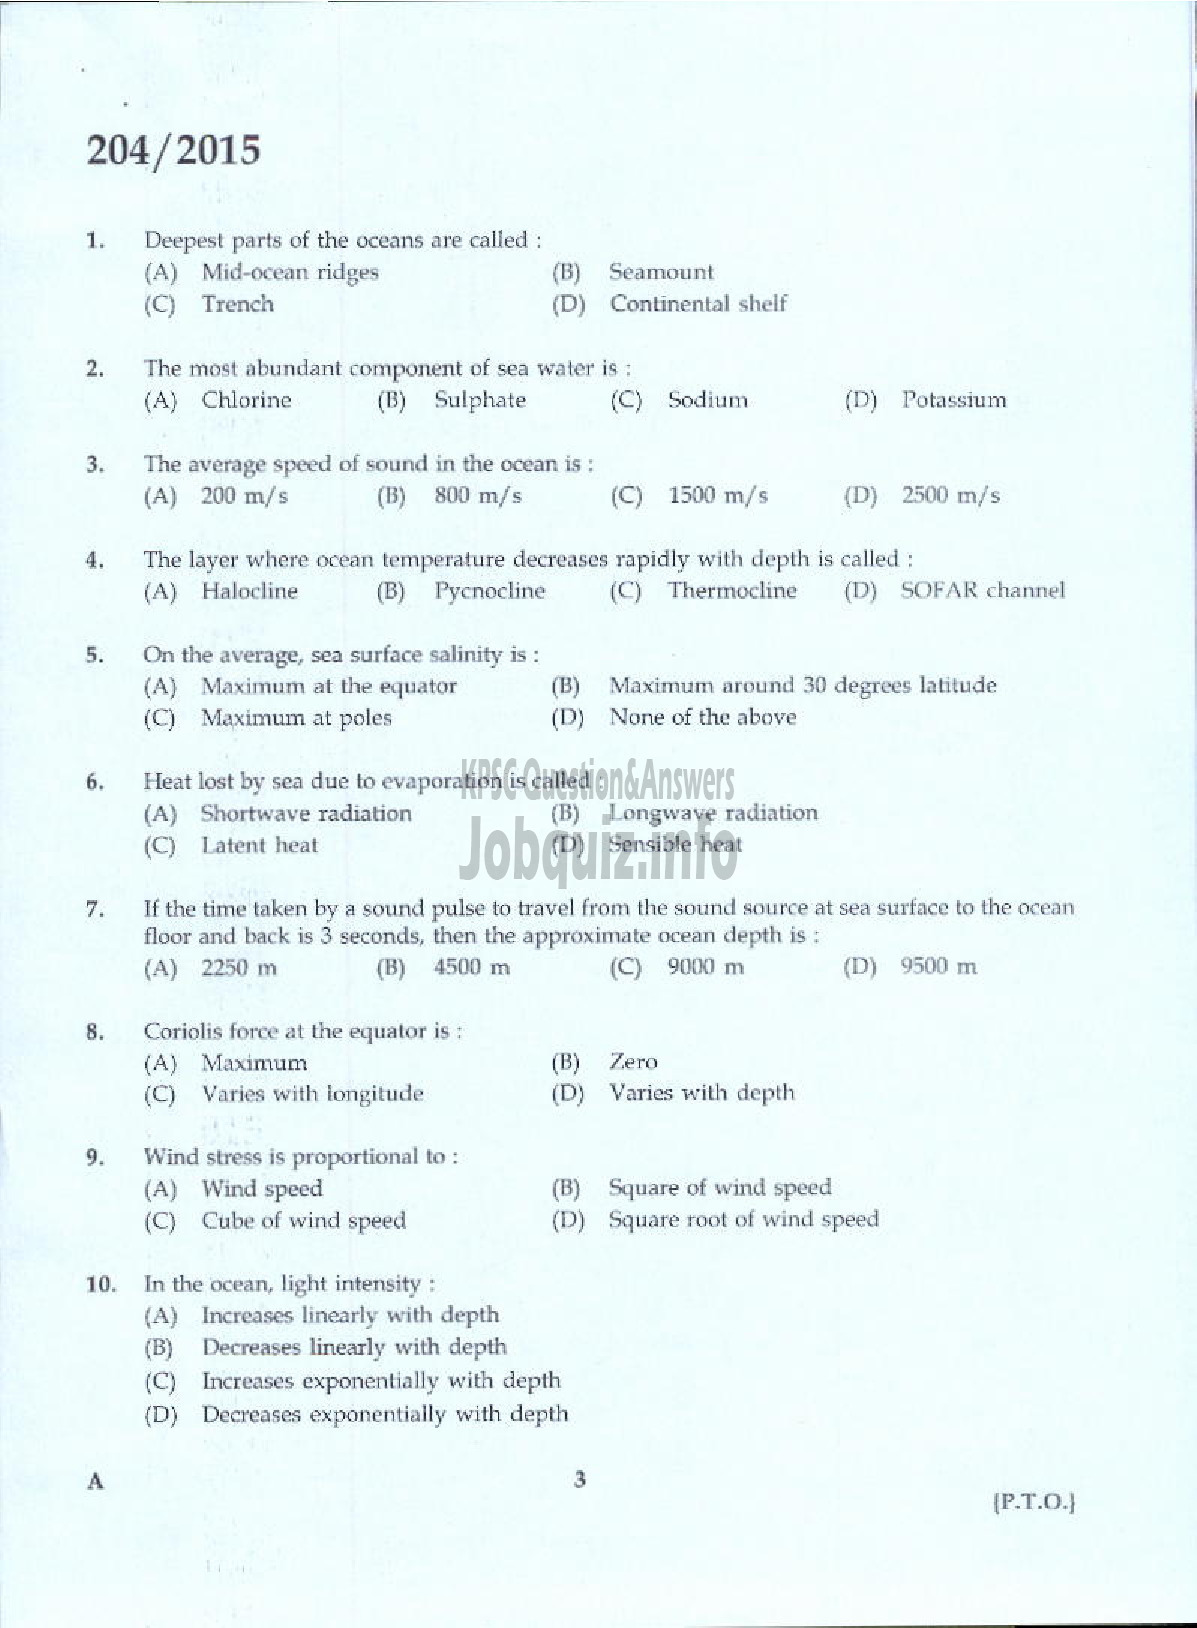 Kerala PSC Question Paper - ASSISTANT DIRECTOR OF FISHERIES ZONAL FISHERIES-1